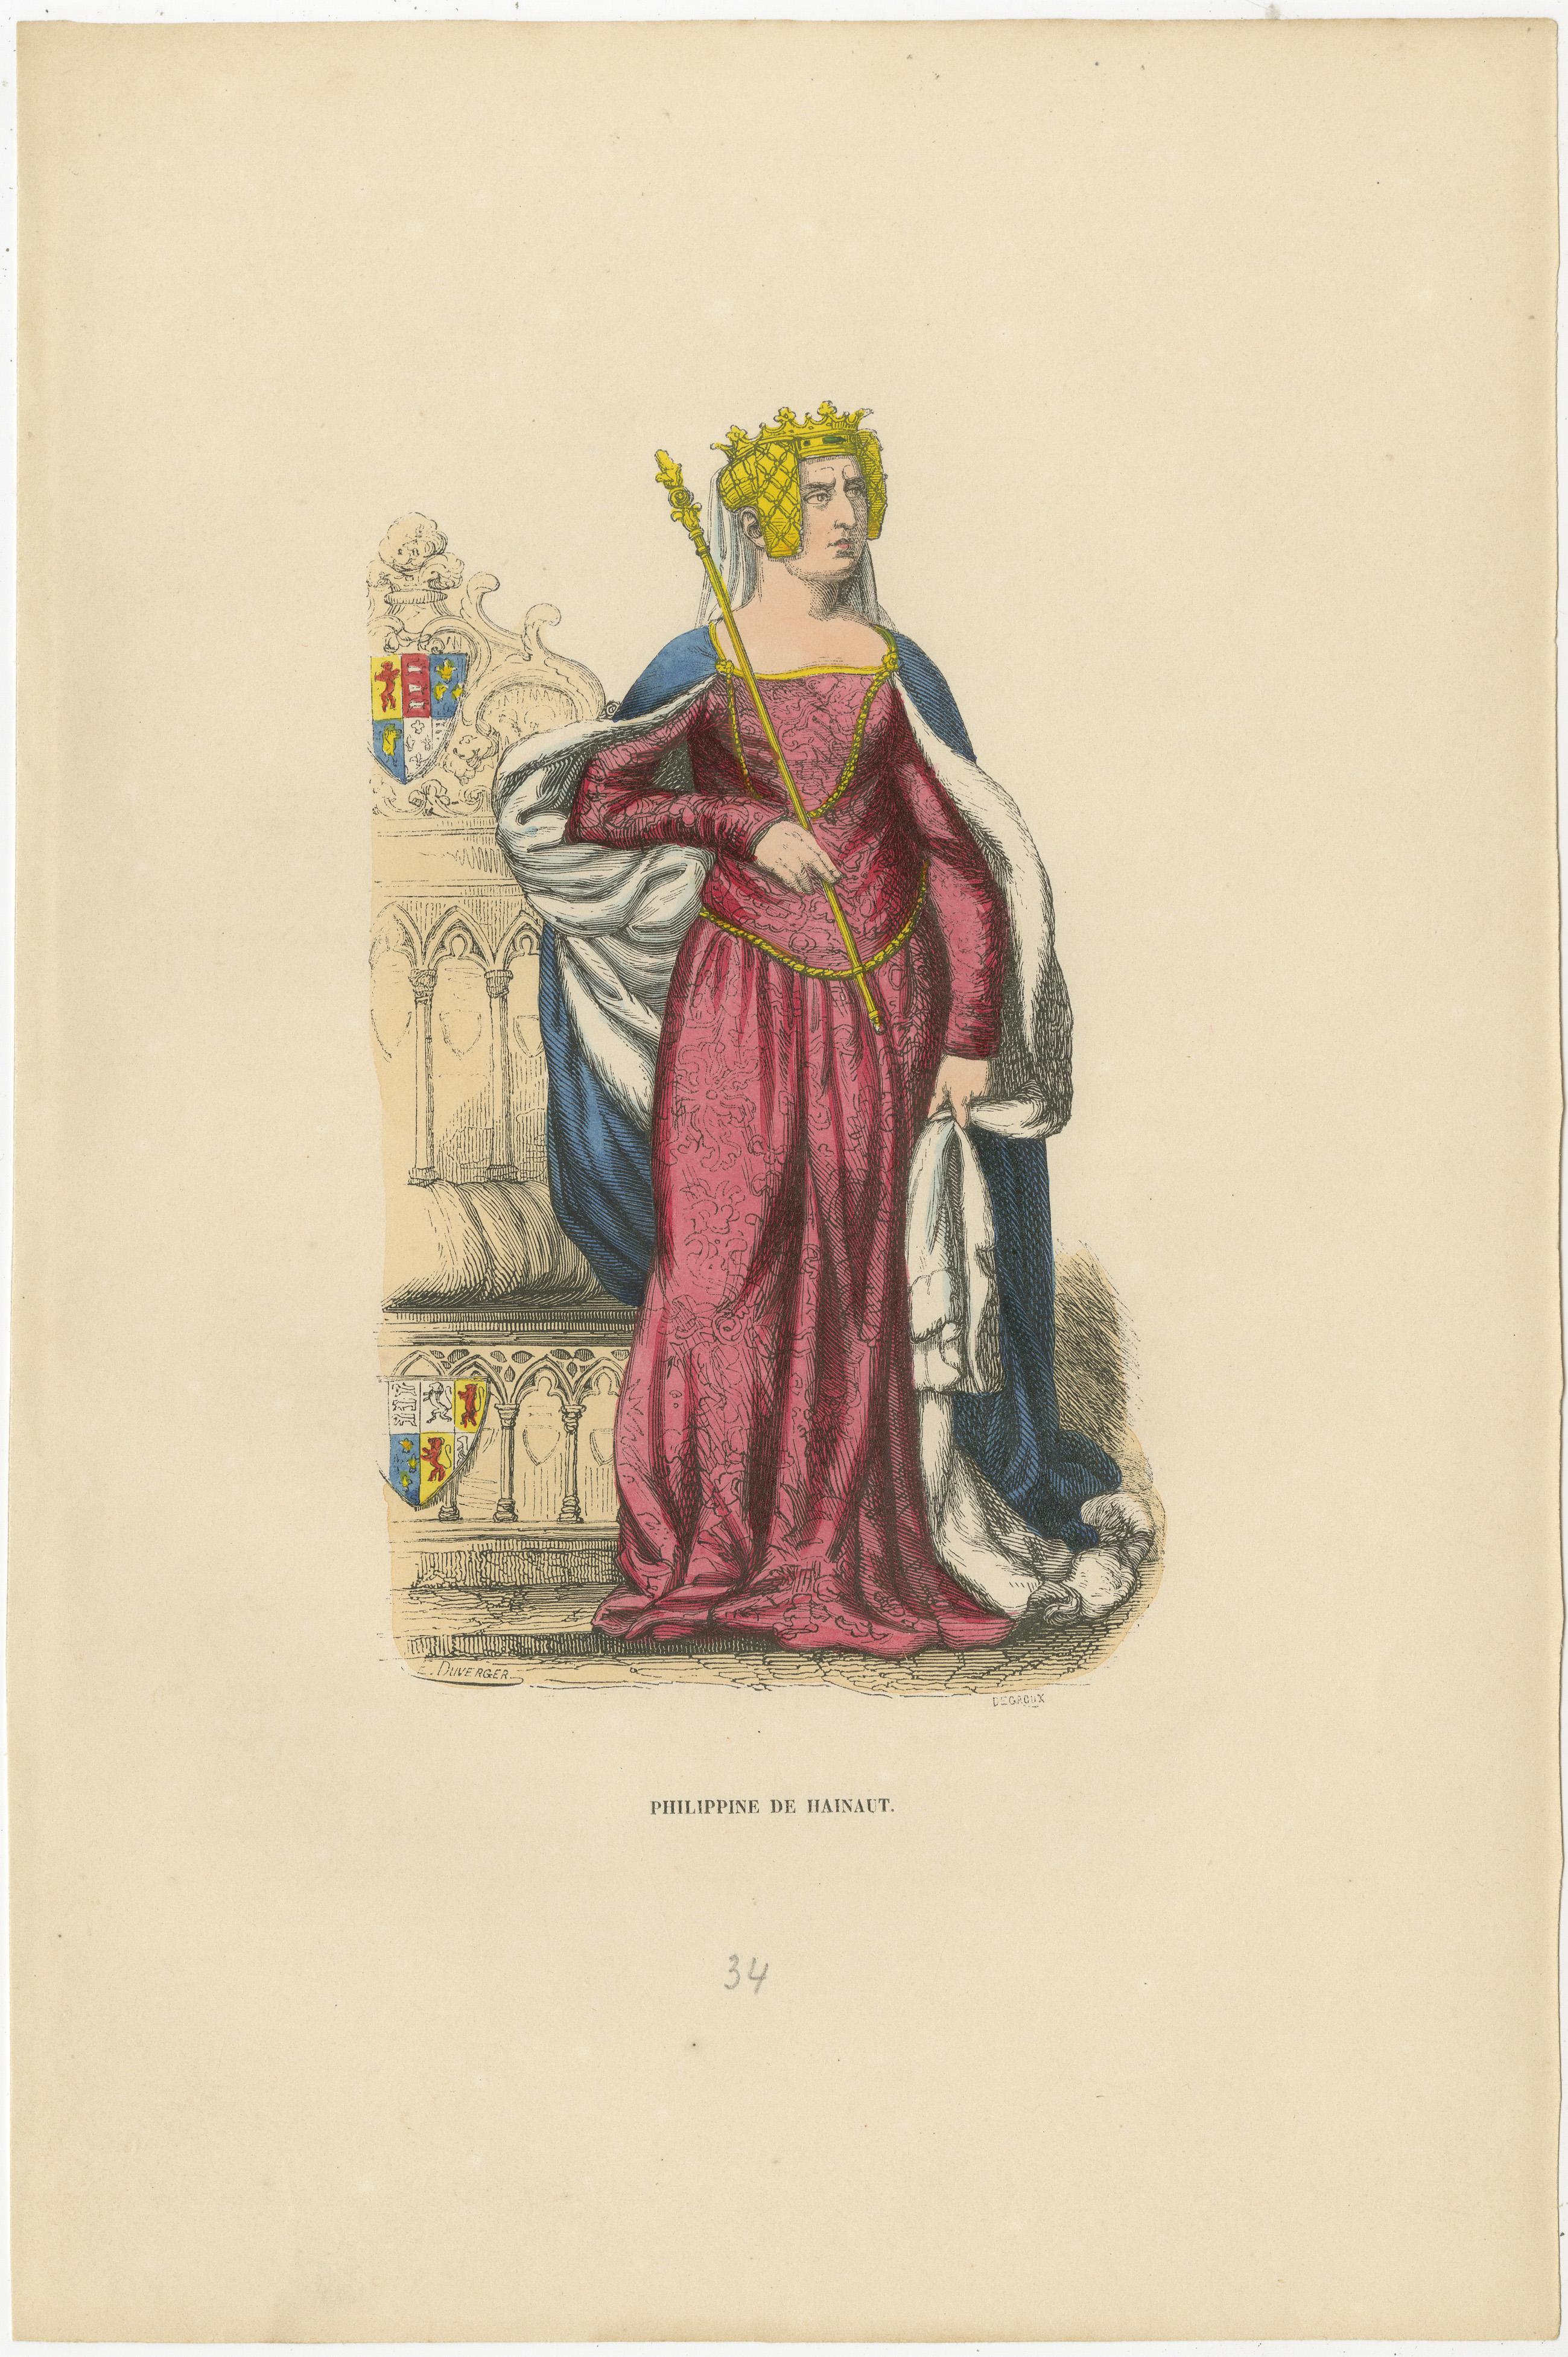 This is an original antique illustration of Philippa of Hainaut, who was Queen of England as the wife of King Edward III. Philippa was renowned for her piety, maternal nature, and diplomatic wisdom. Her depicted attire is typical of the 14th-century